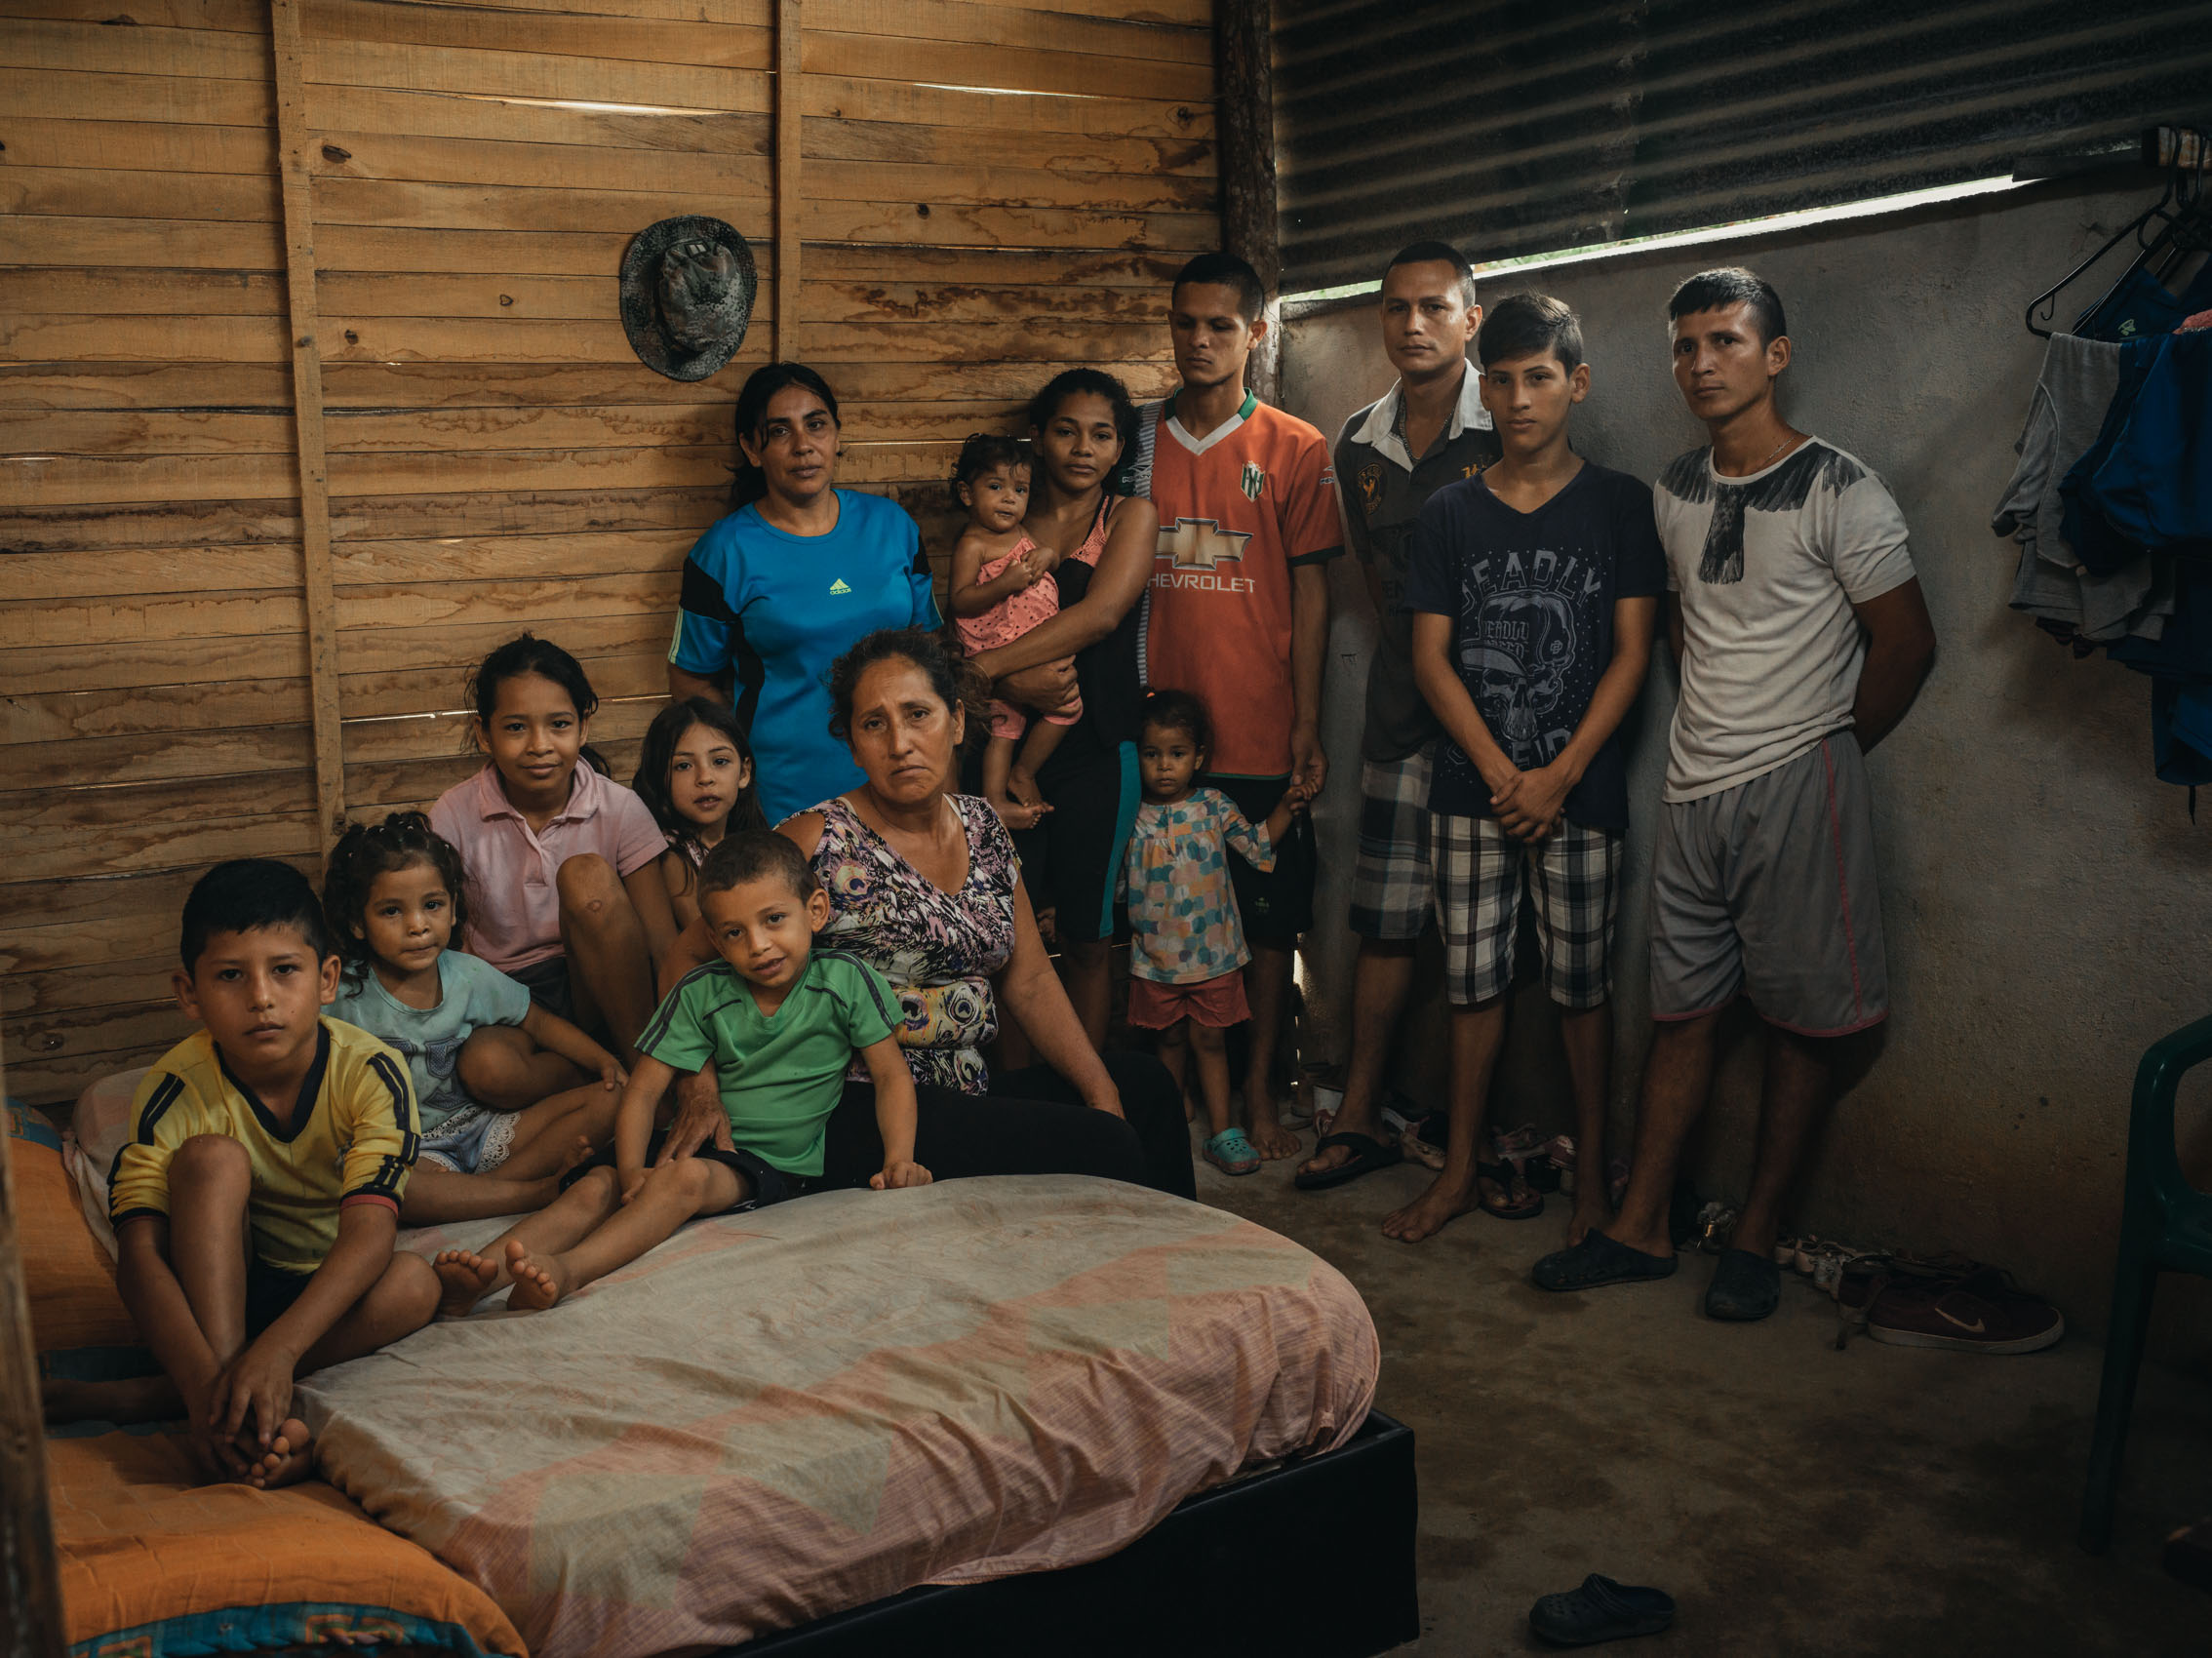 A portrait of a Venezuelan family in their bedroom where all 14 sleep